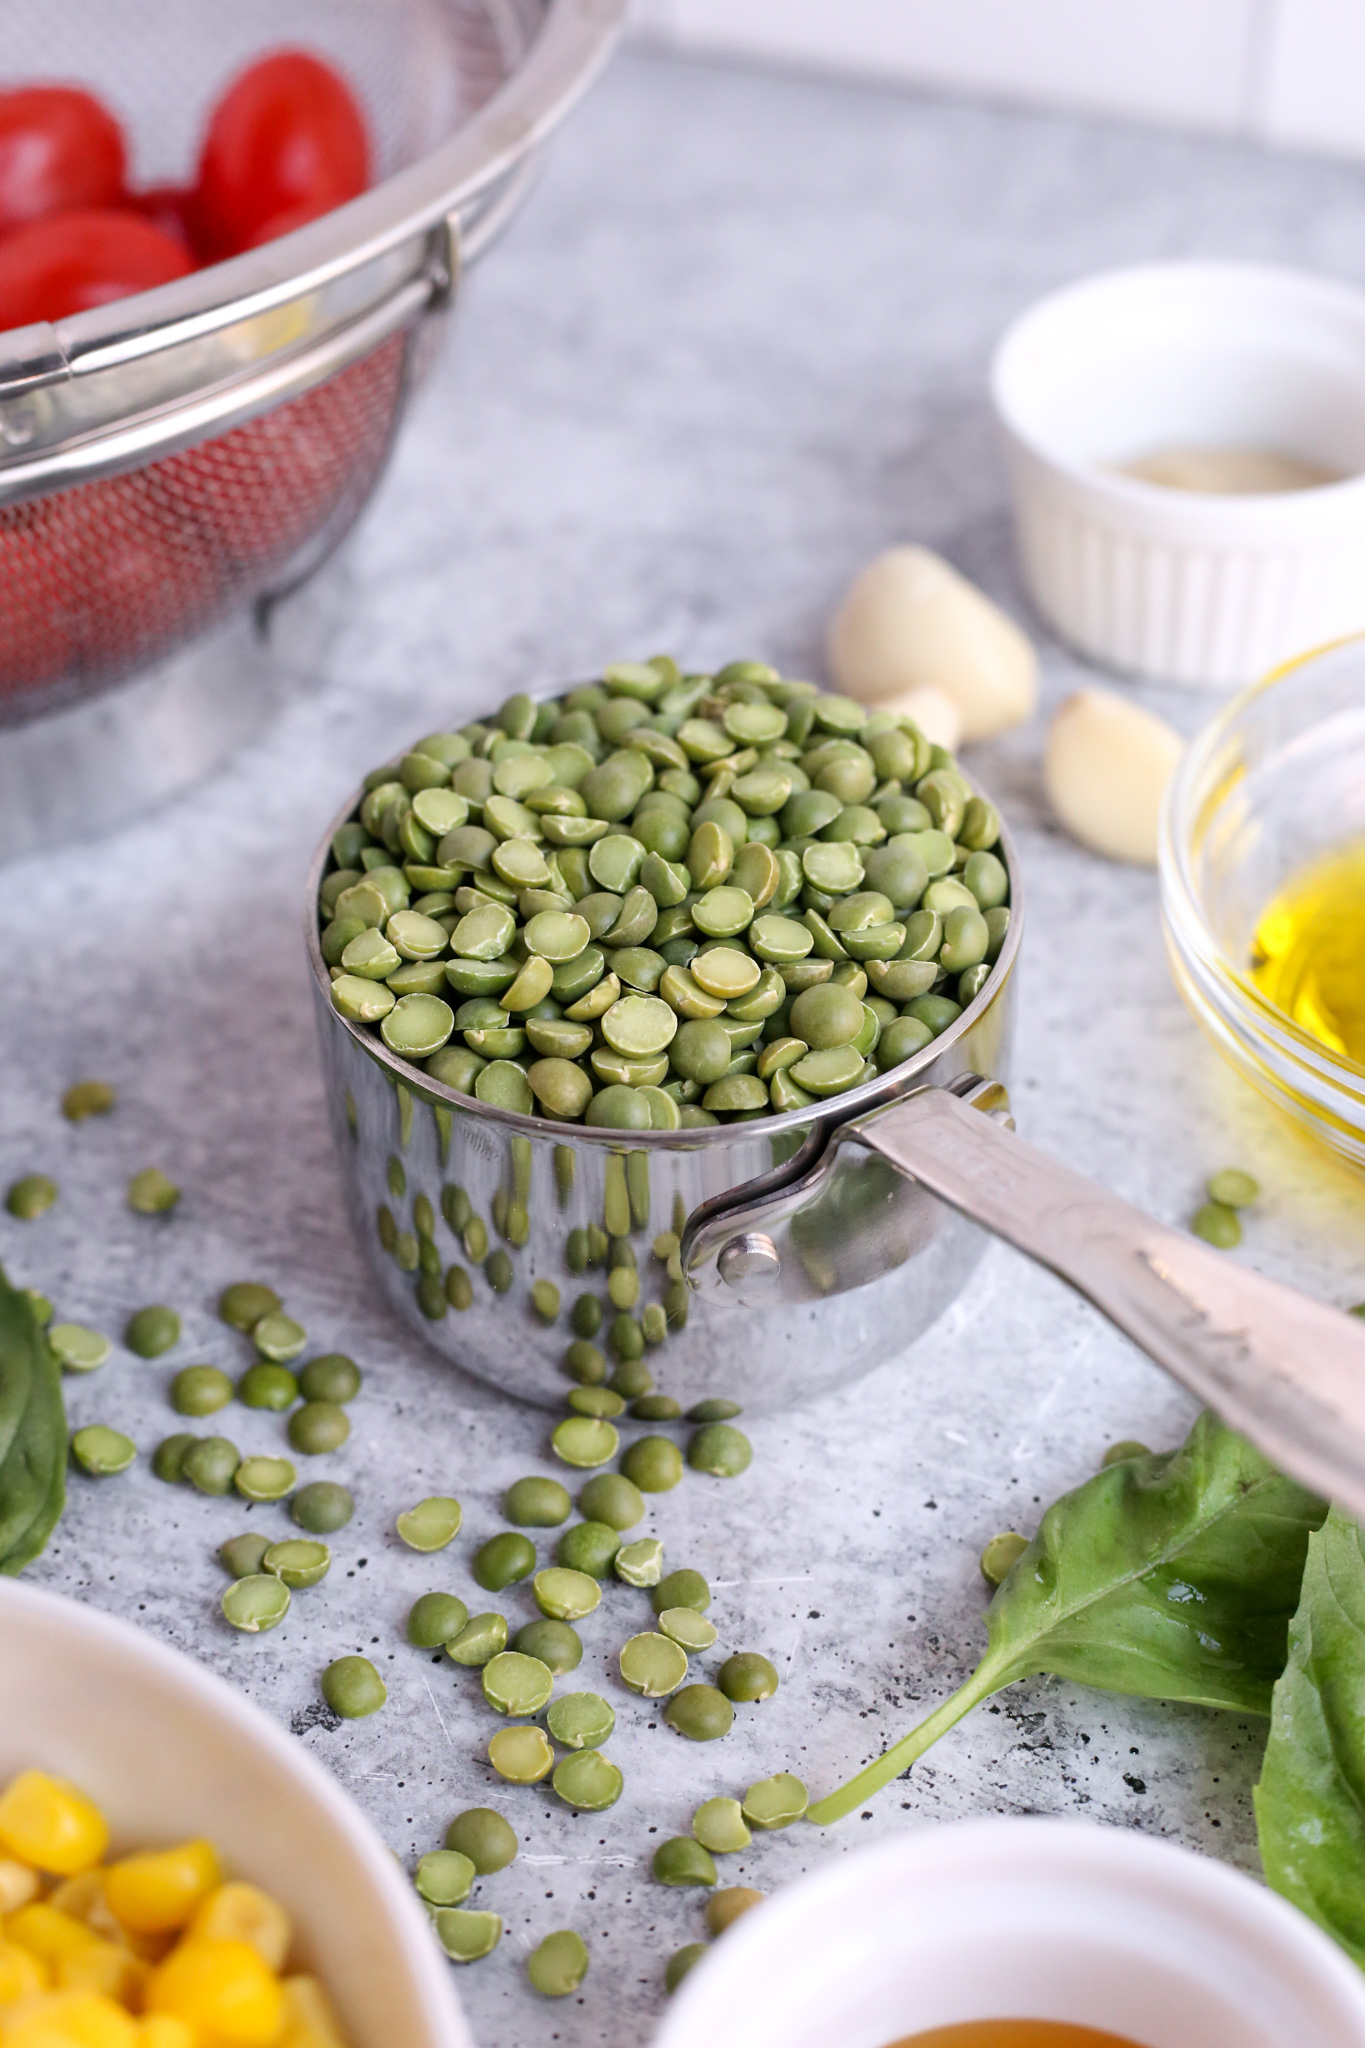 A close up shot of a metal measuring cup with uncooked green split peas, surrounded by other ingredients for summer split pea salad recipe